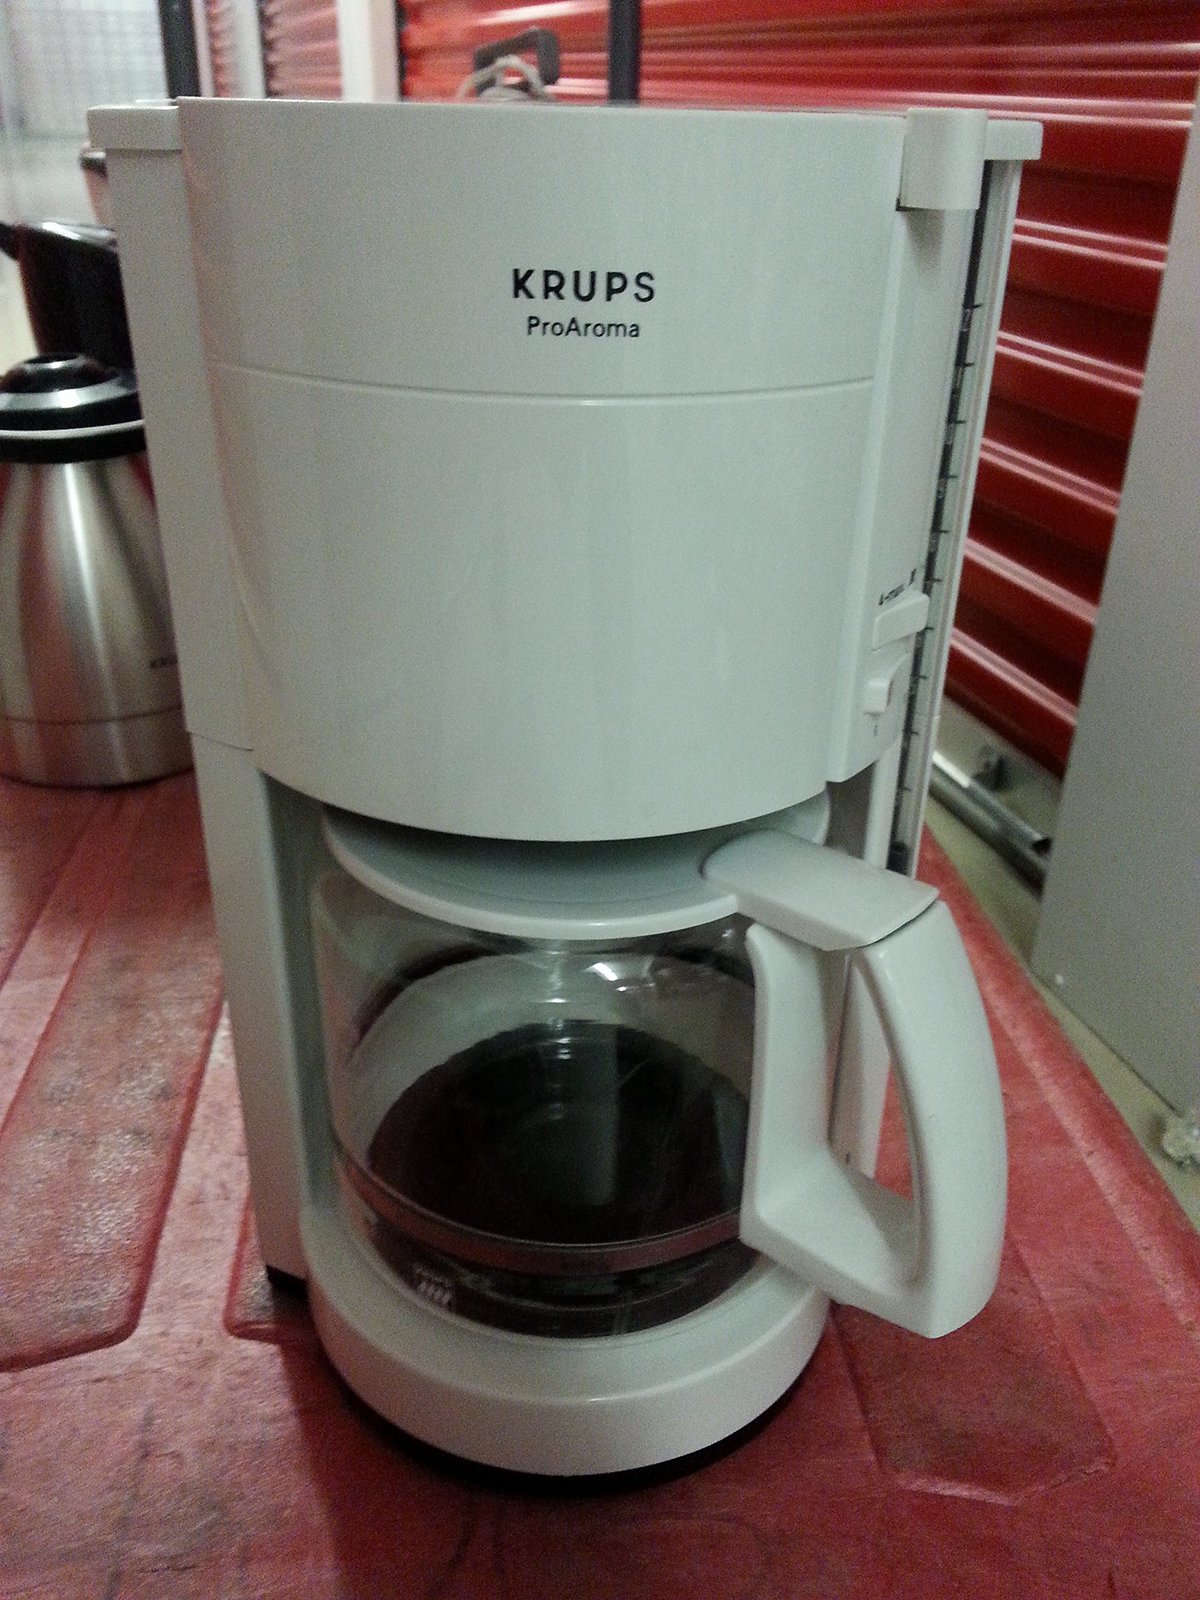 KRUPS ProAroma Type 453/ 12Cup Drip Coffee Maker/ White Color/ - $160.00